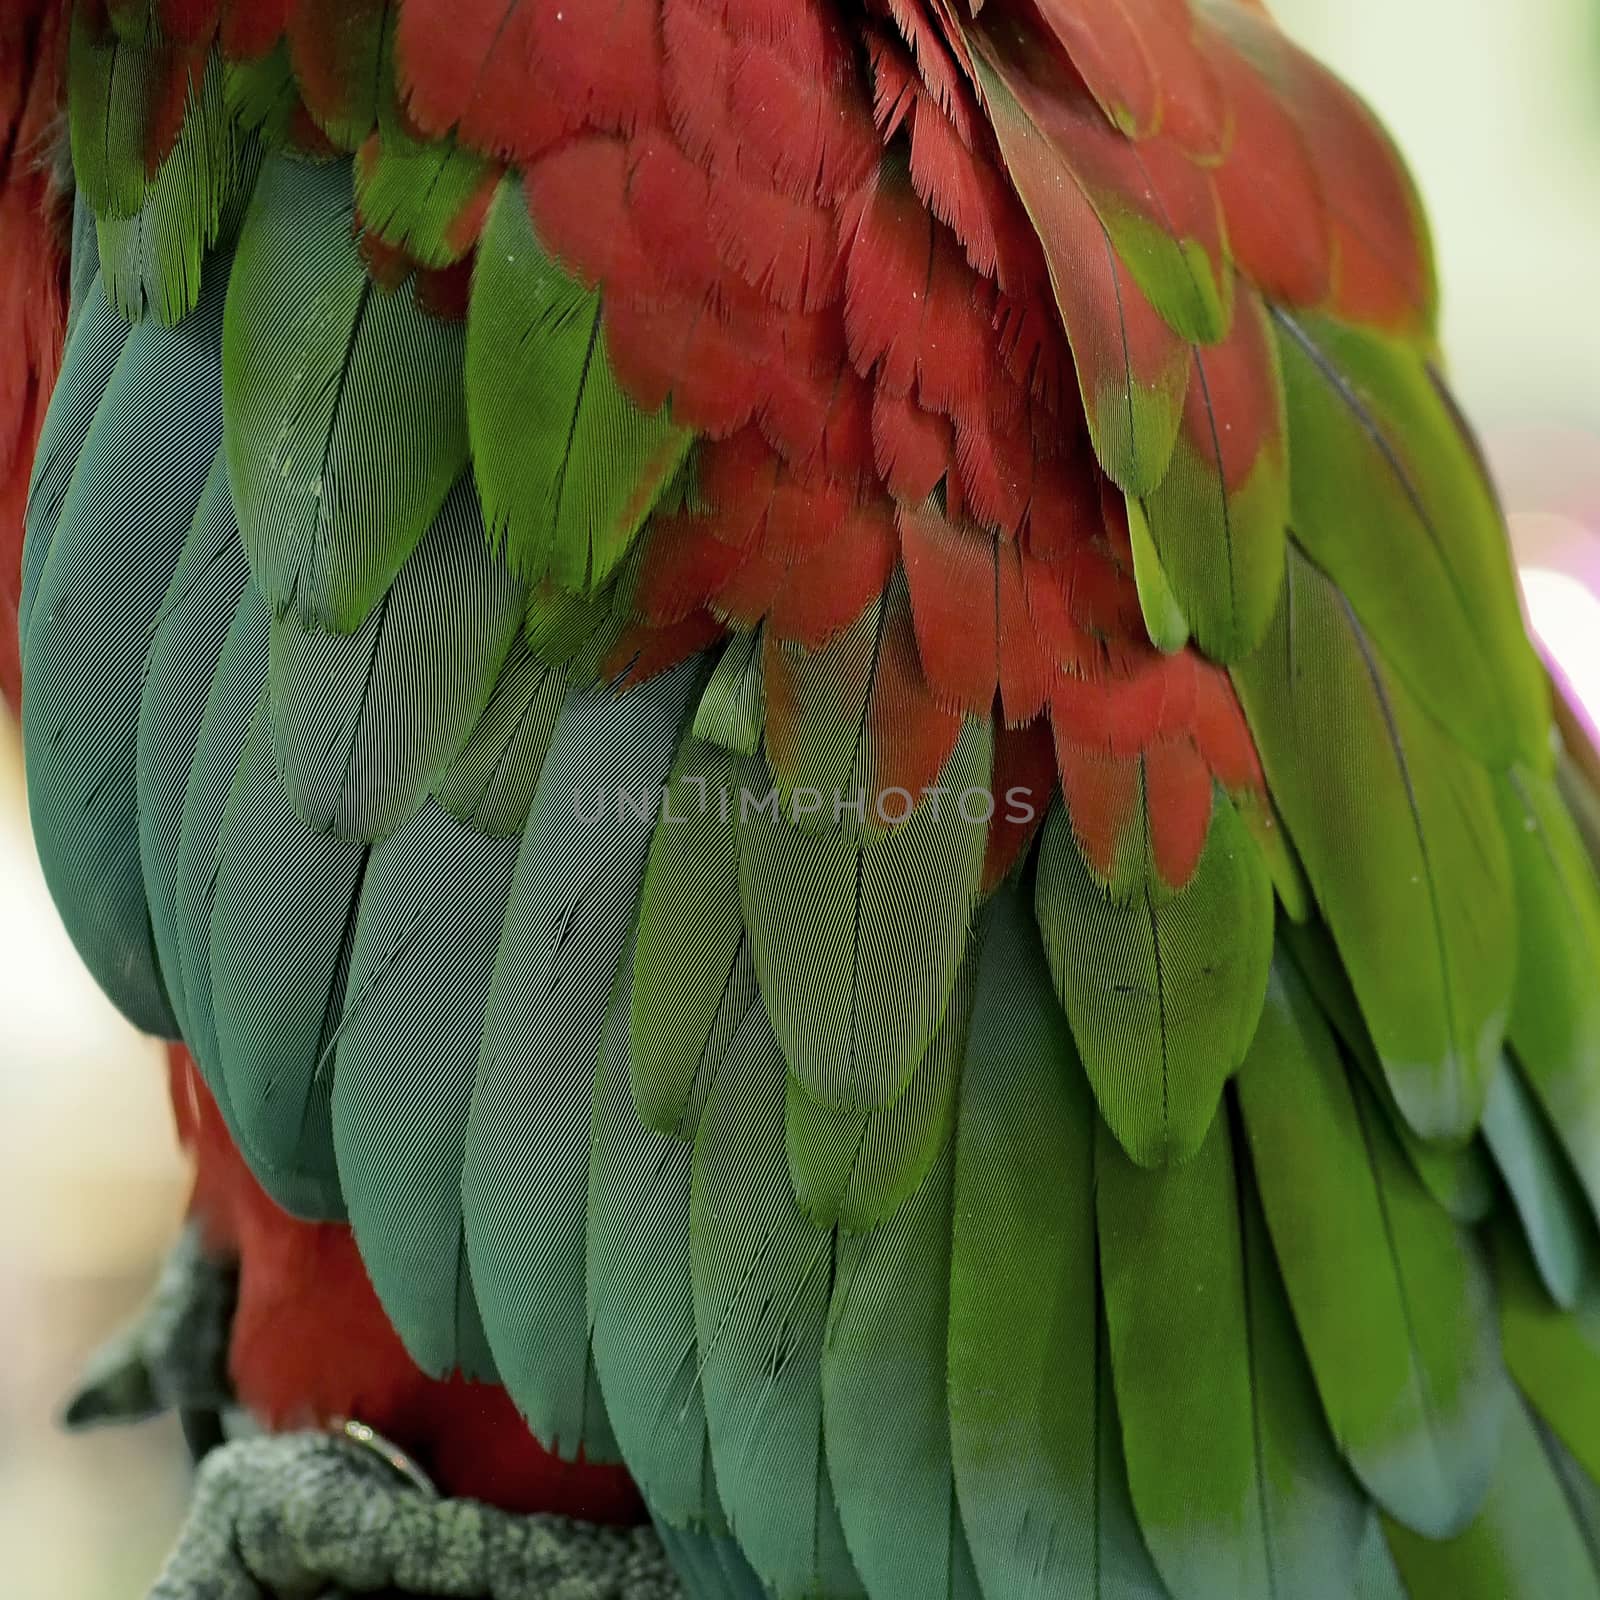 macaw parrot feather    by leisuretime70